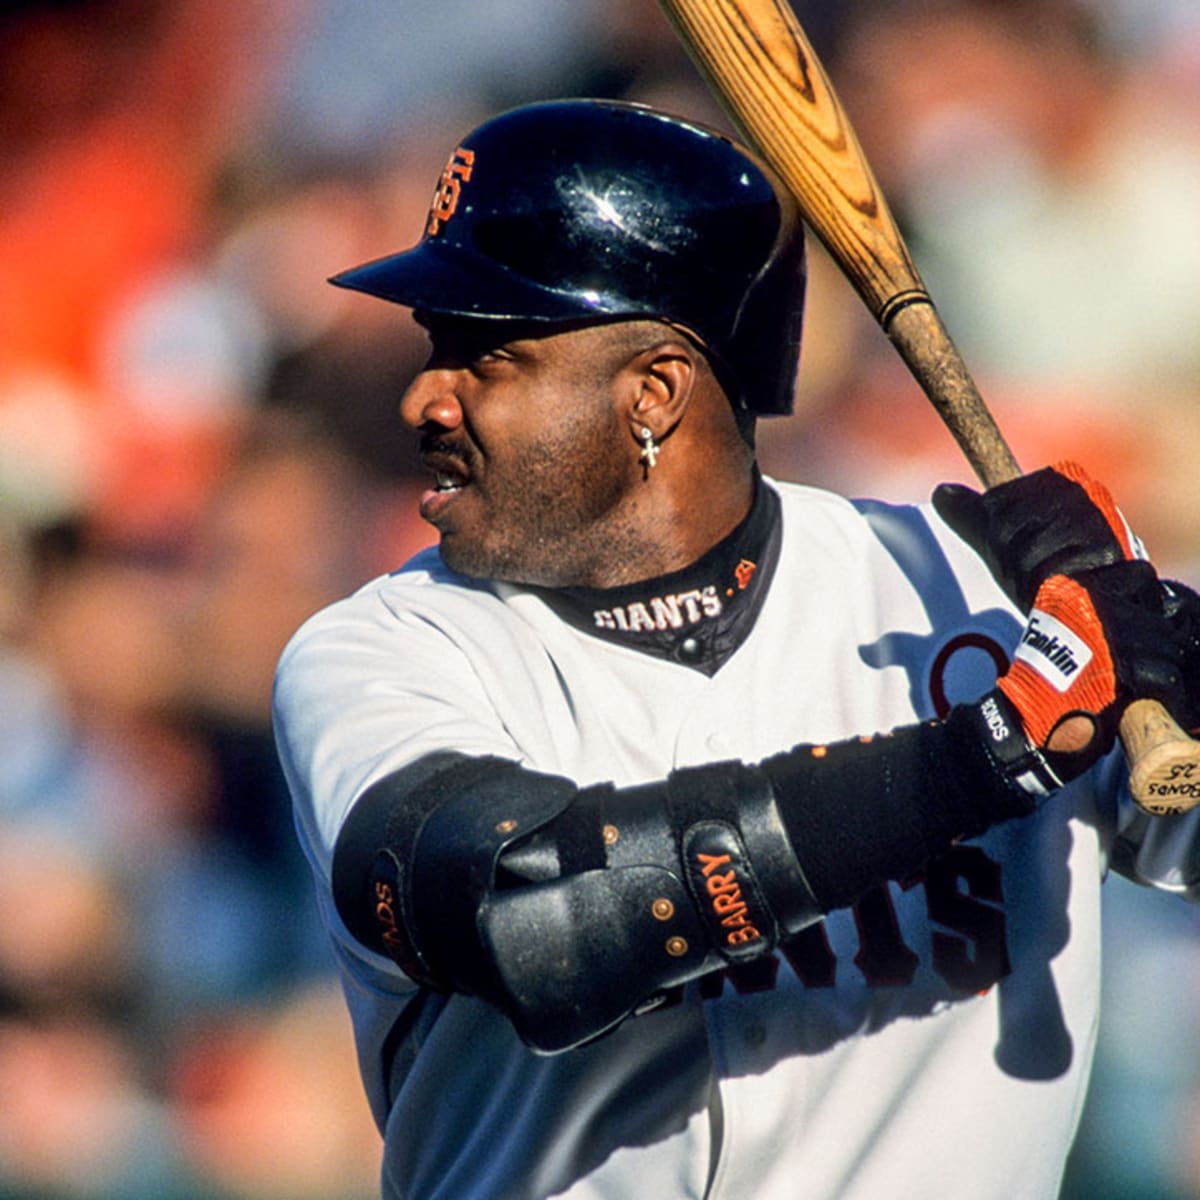 Barry Bonds: Oral history of bases-loaded intentional walk